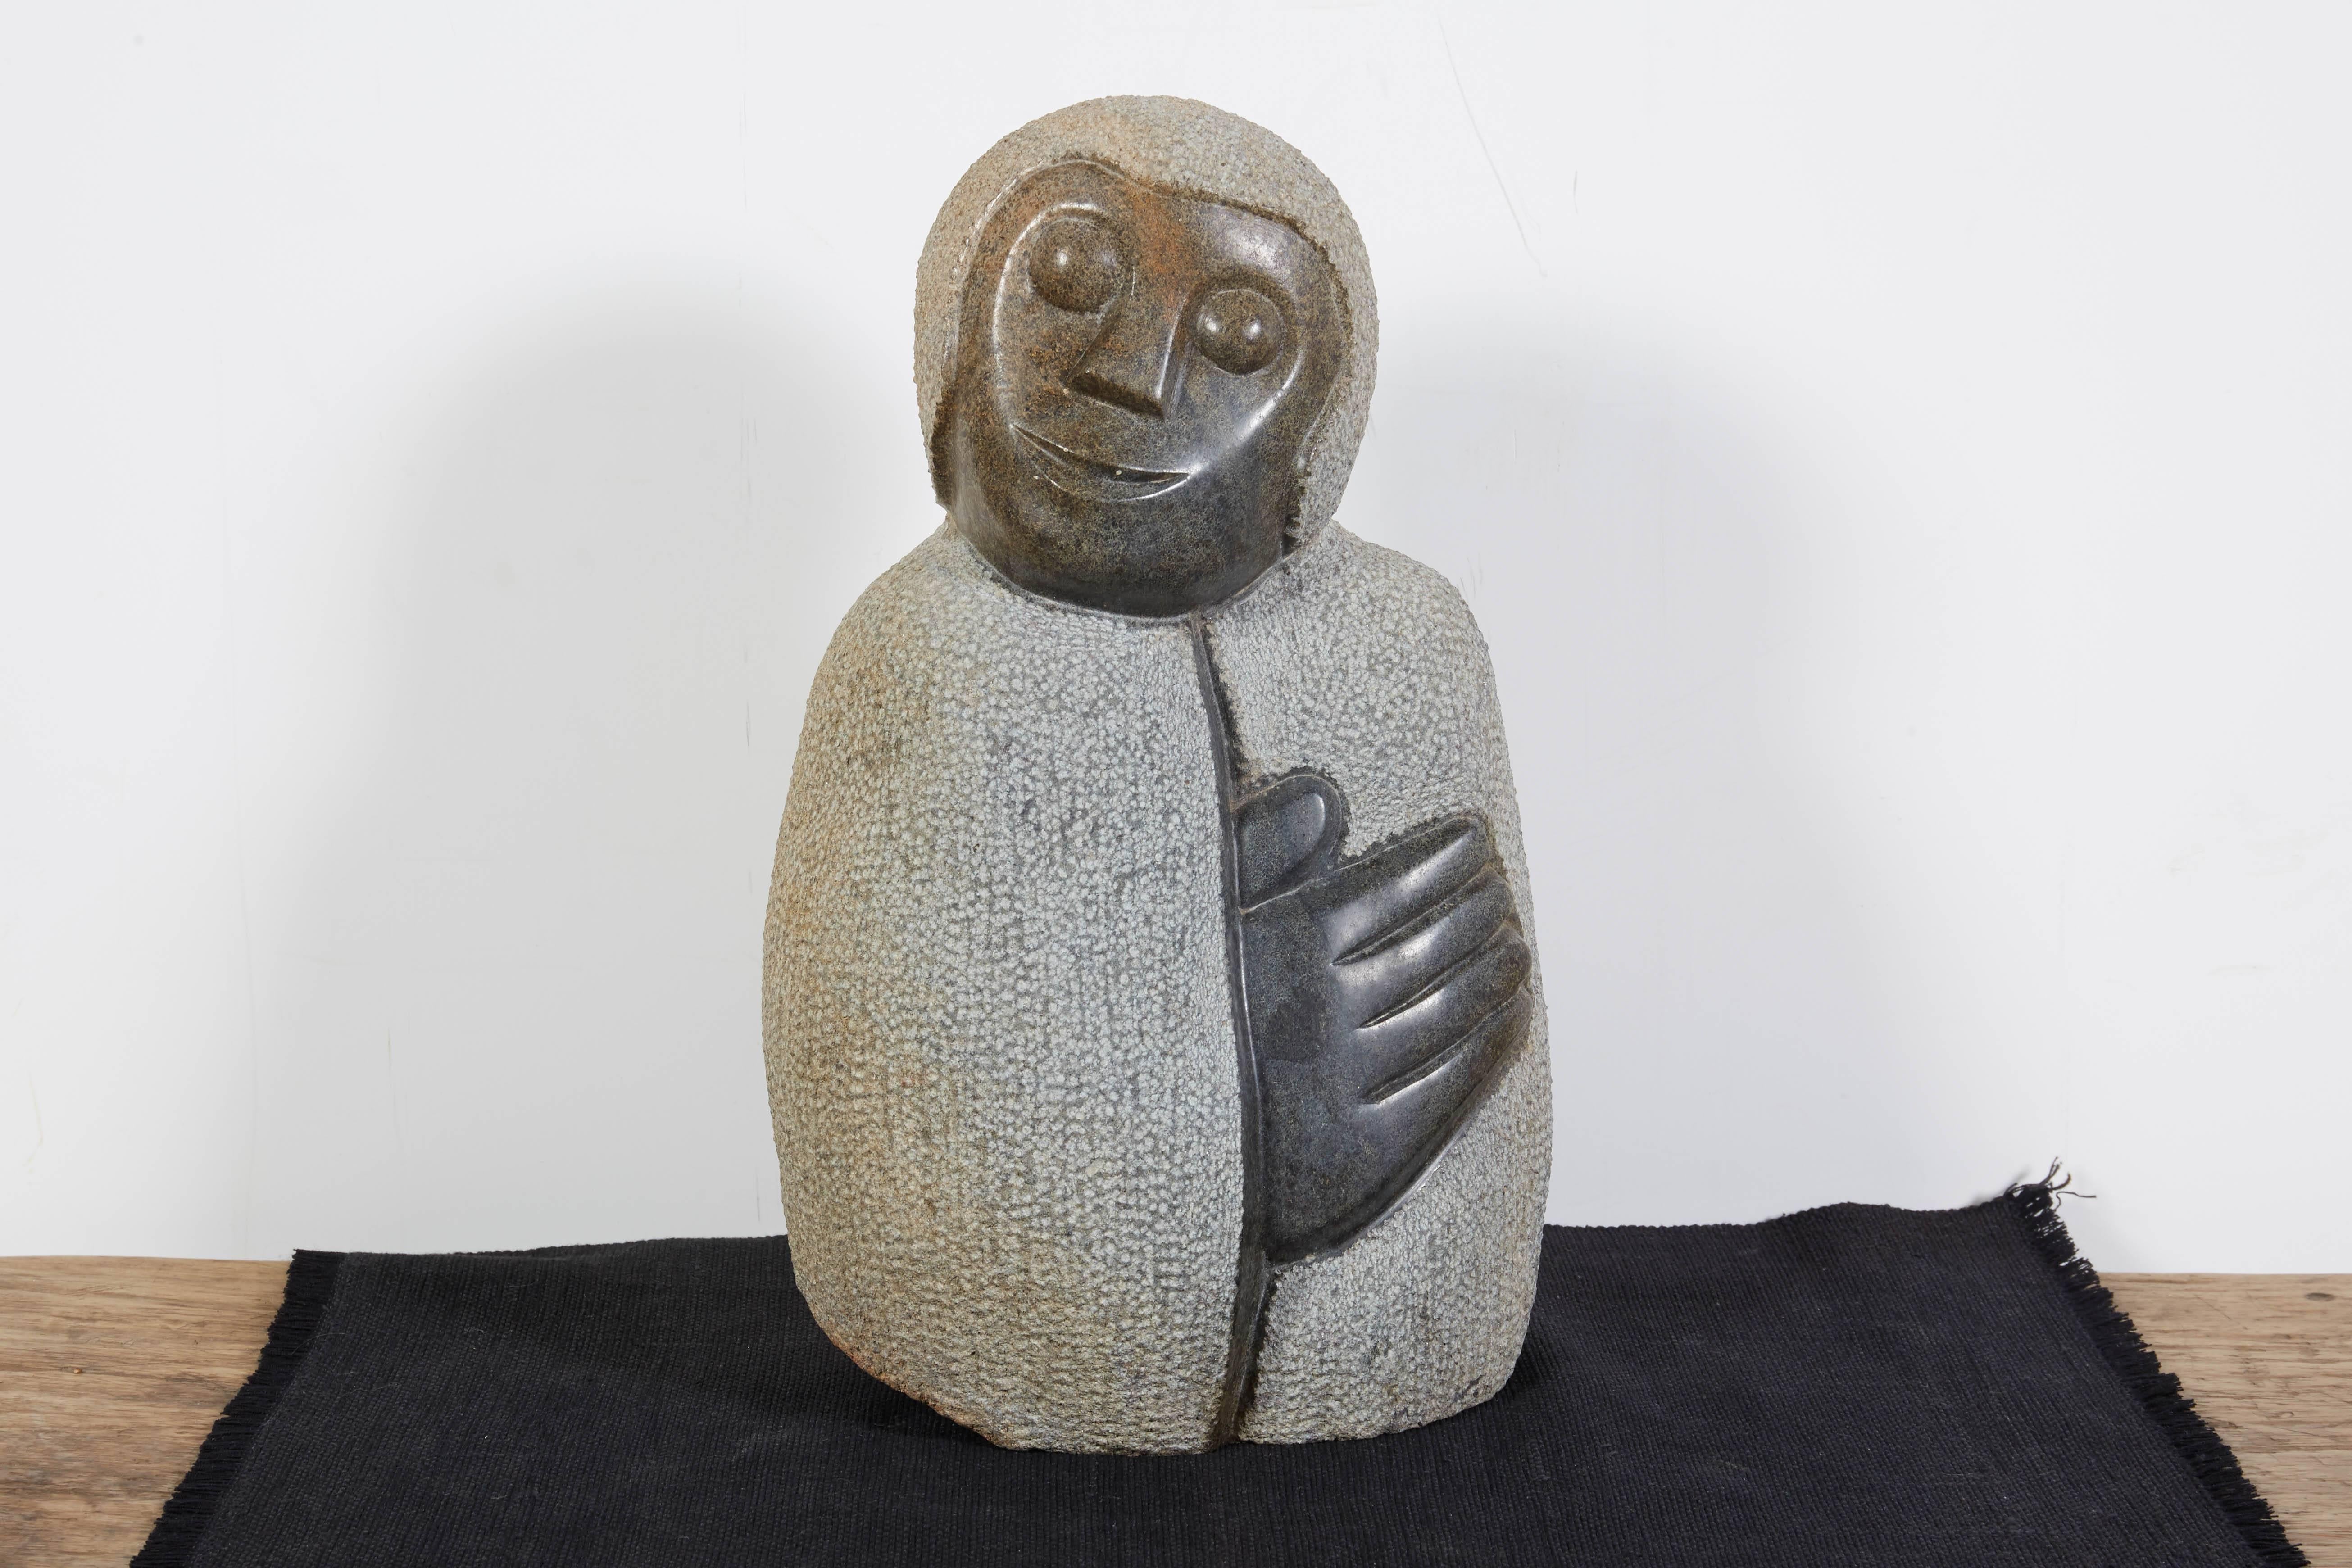 A sensitively carved stone sculpture from Zimbabwe by Shona artist Netsai Mukomberanwa
depicting a lovely image of a caring mother with her hand placed gently over her heart. This carving is striking and touching from every angle. See additional